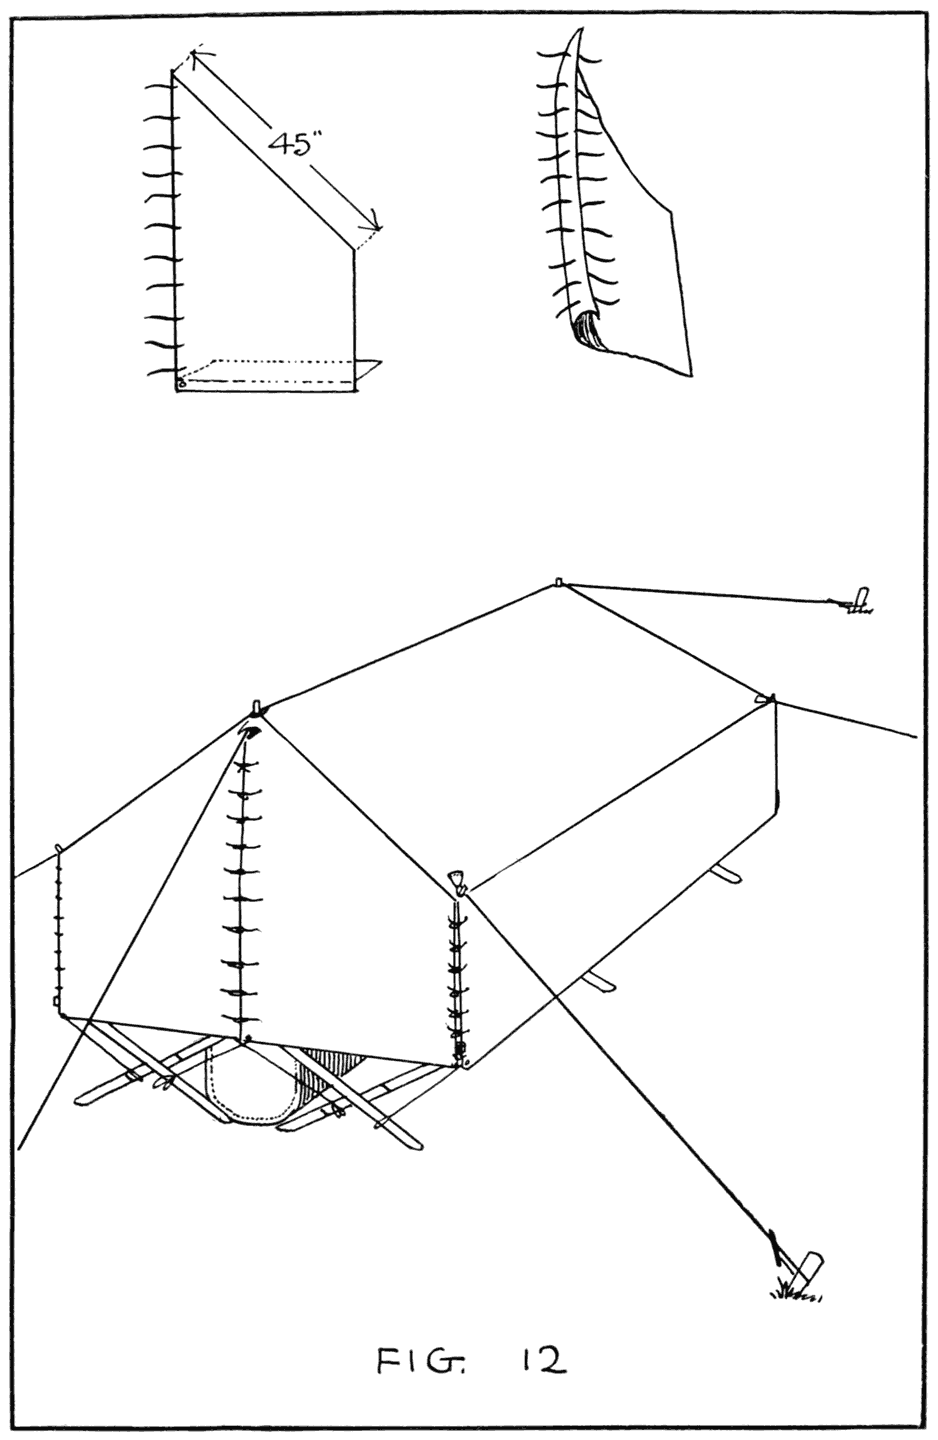 End pieces of tent of home-made camping outfit, and the way the
design appears when closed. Note the various cross cords and
tapes which permit of close tying in case of storms. Normally the
side flap is tied back, with the inner mosquito netting flap acting
as side wall, since the latter permits of better ventilation.